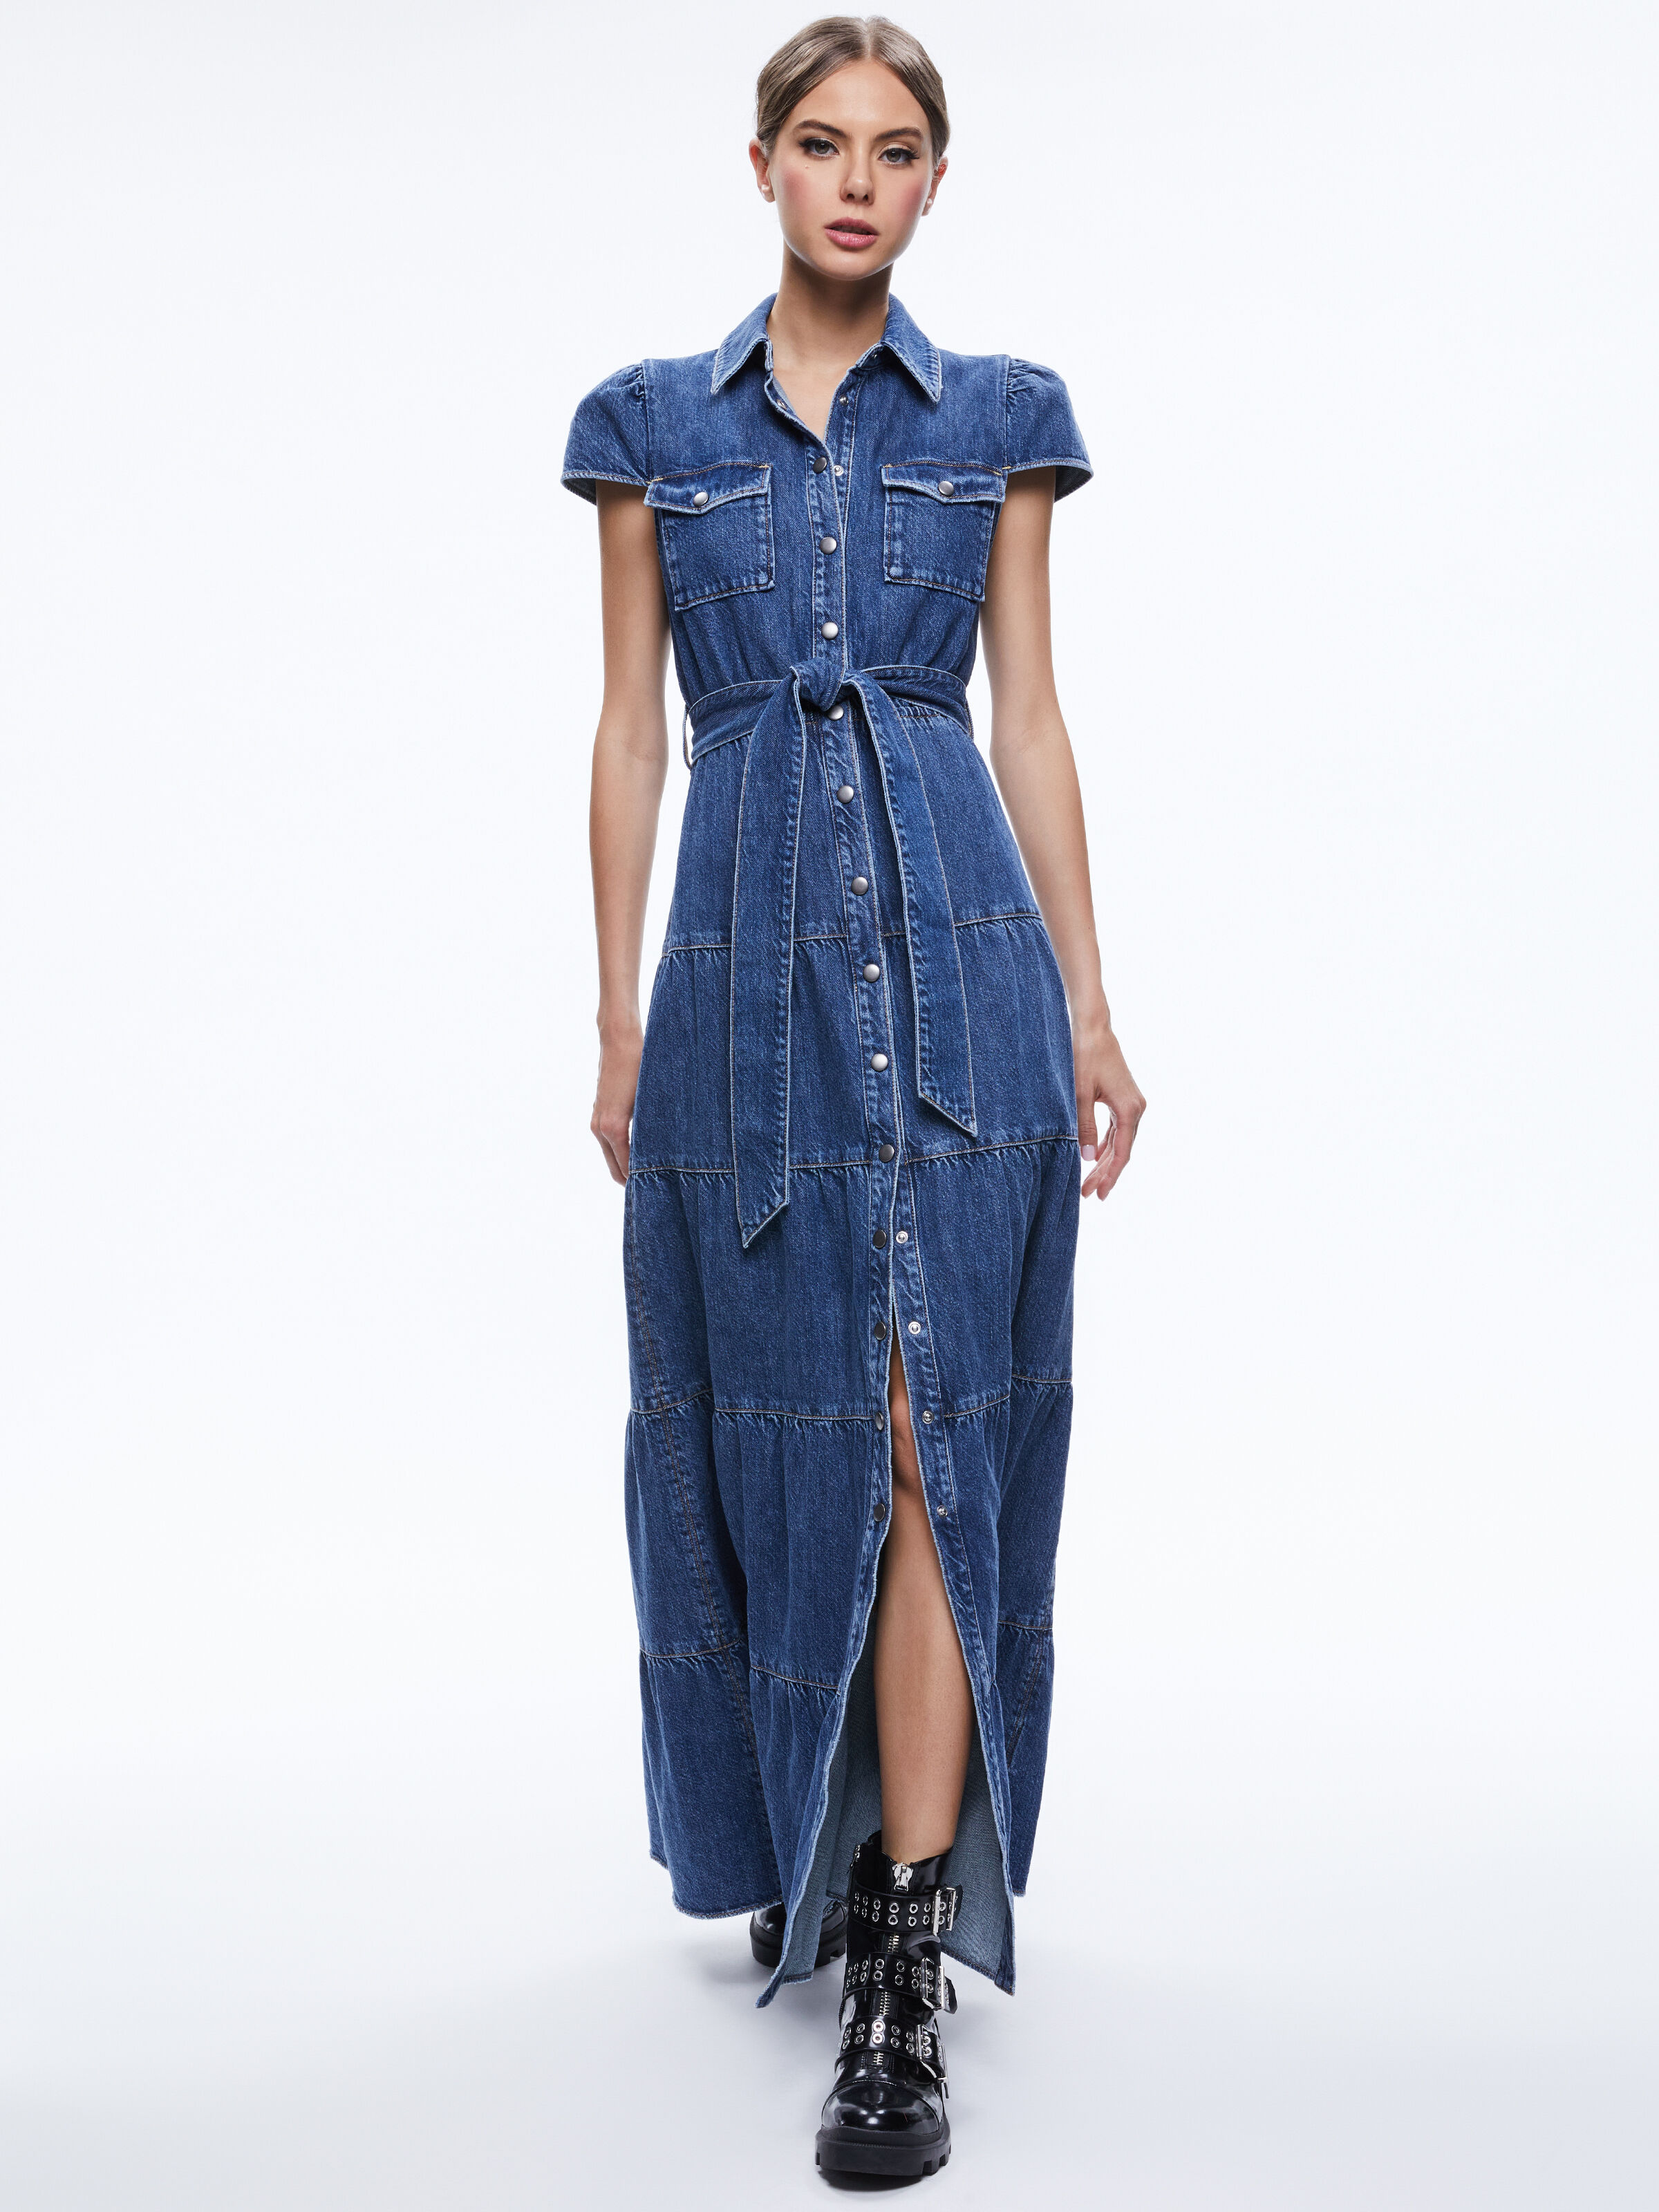 Summer Casual Denim Denim Dress For Women For Women Loose Fit, Ruffle  Detail, Short Sleeves, O Neck, Knee Length, Draped Design Lady Vestido From  Luote, $18.99 | DHgate.Com